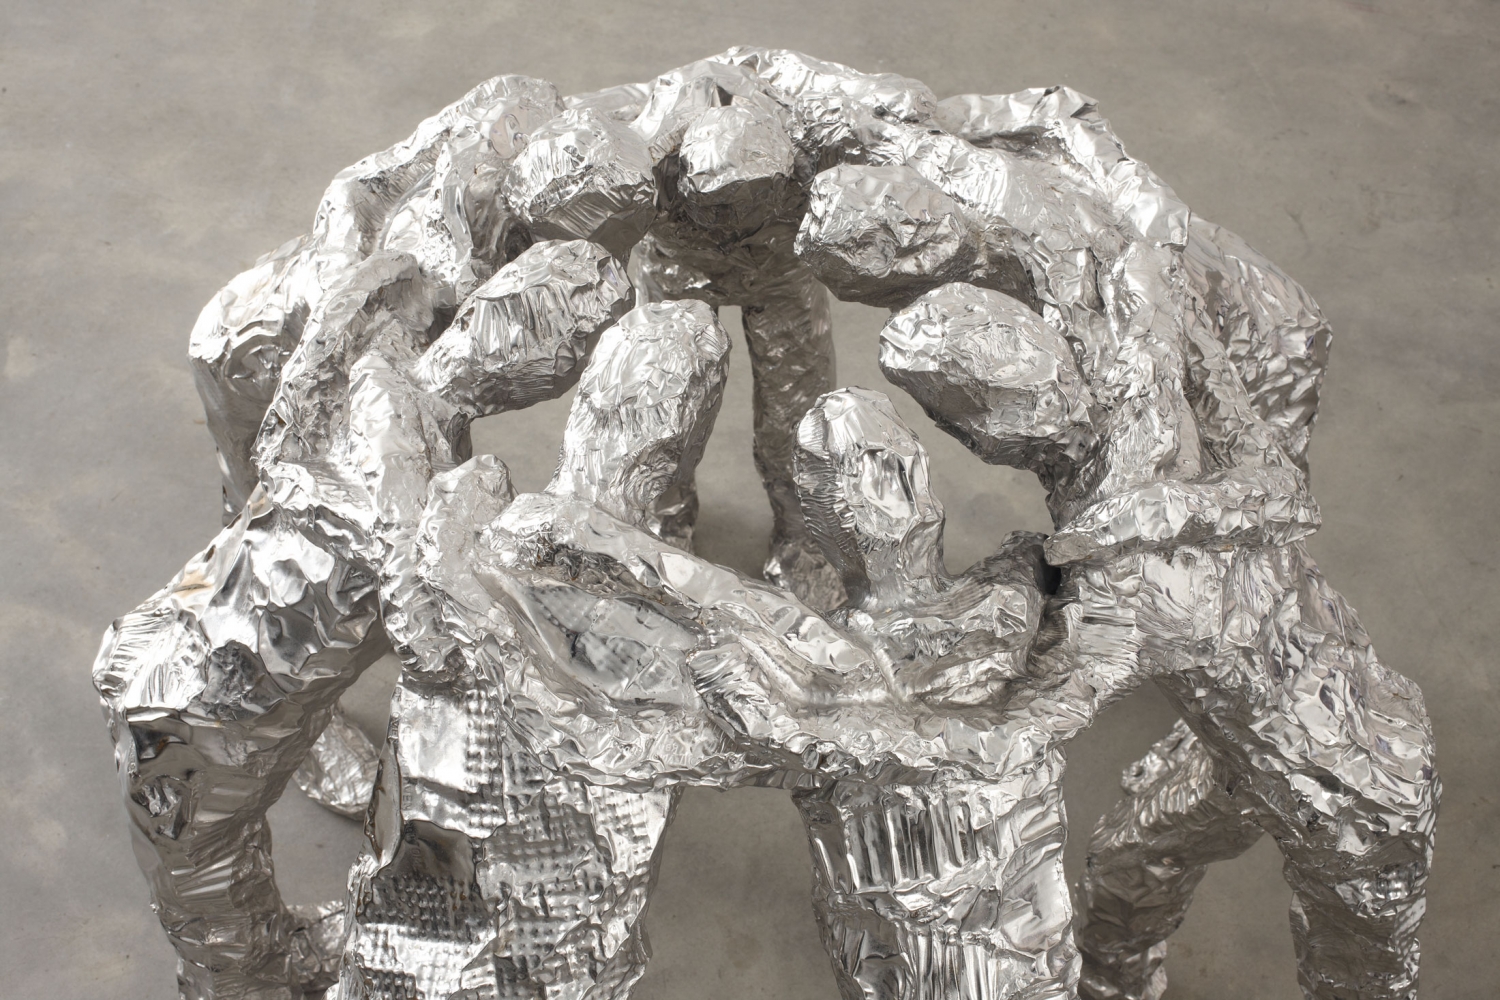 Tom Friedman
Huddle, 2013

Detail
Stainless steel
34 x 35 x 35 inches
(86.36 x 88.9 x 88.9 cm)